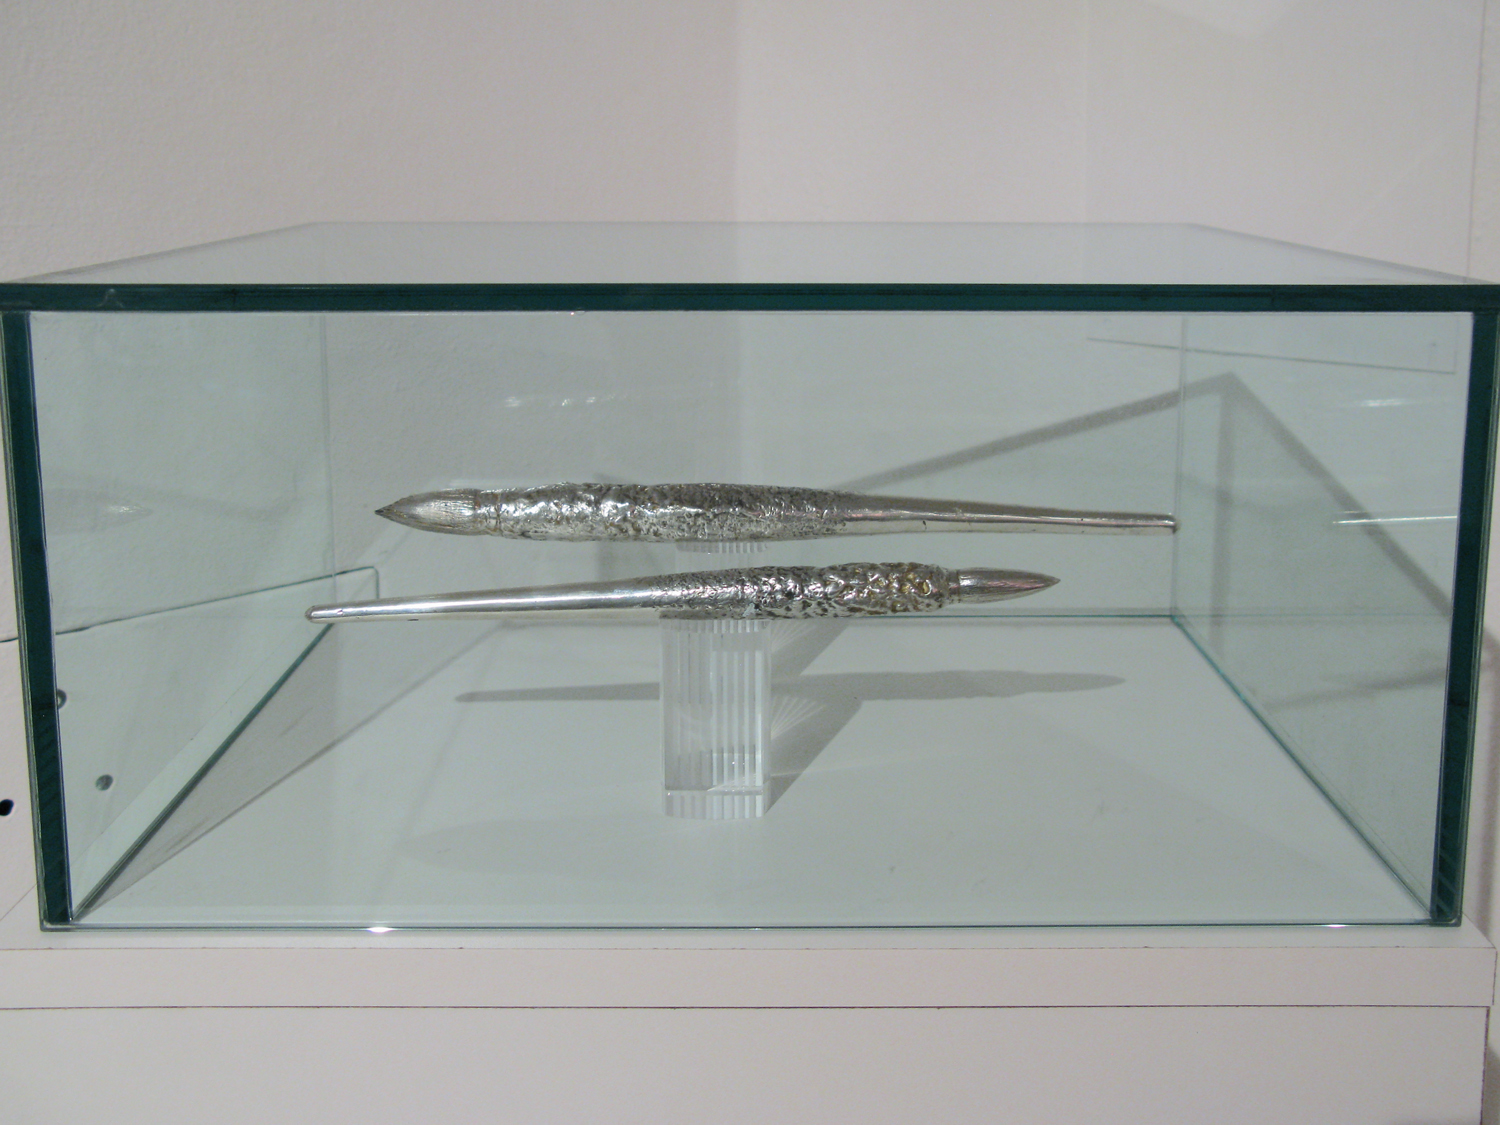  Sword and Dagger, 2009 solid cast silver dimensions vary&nbsp; 